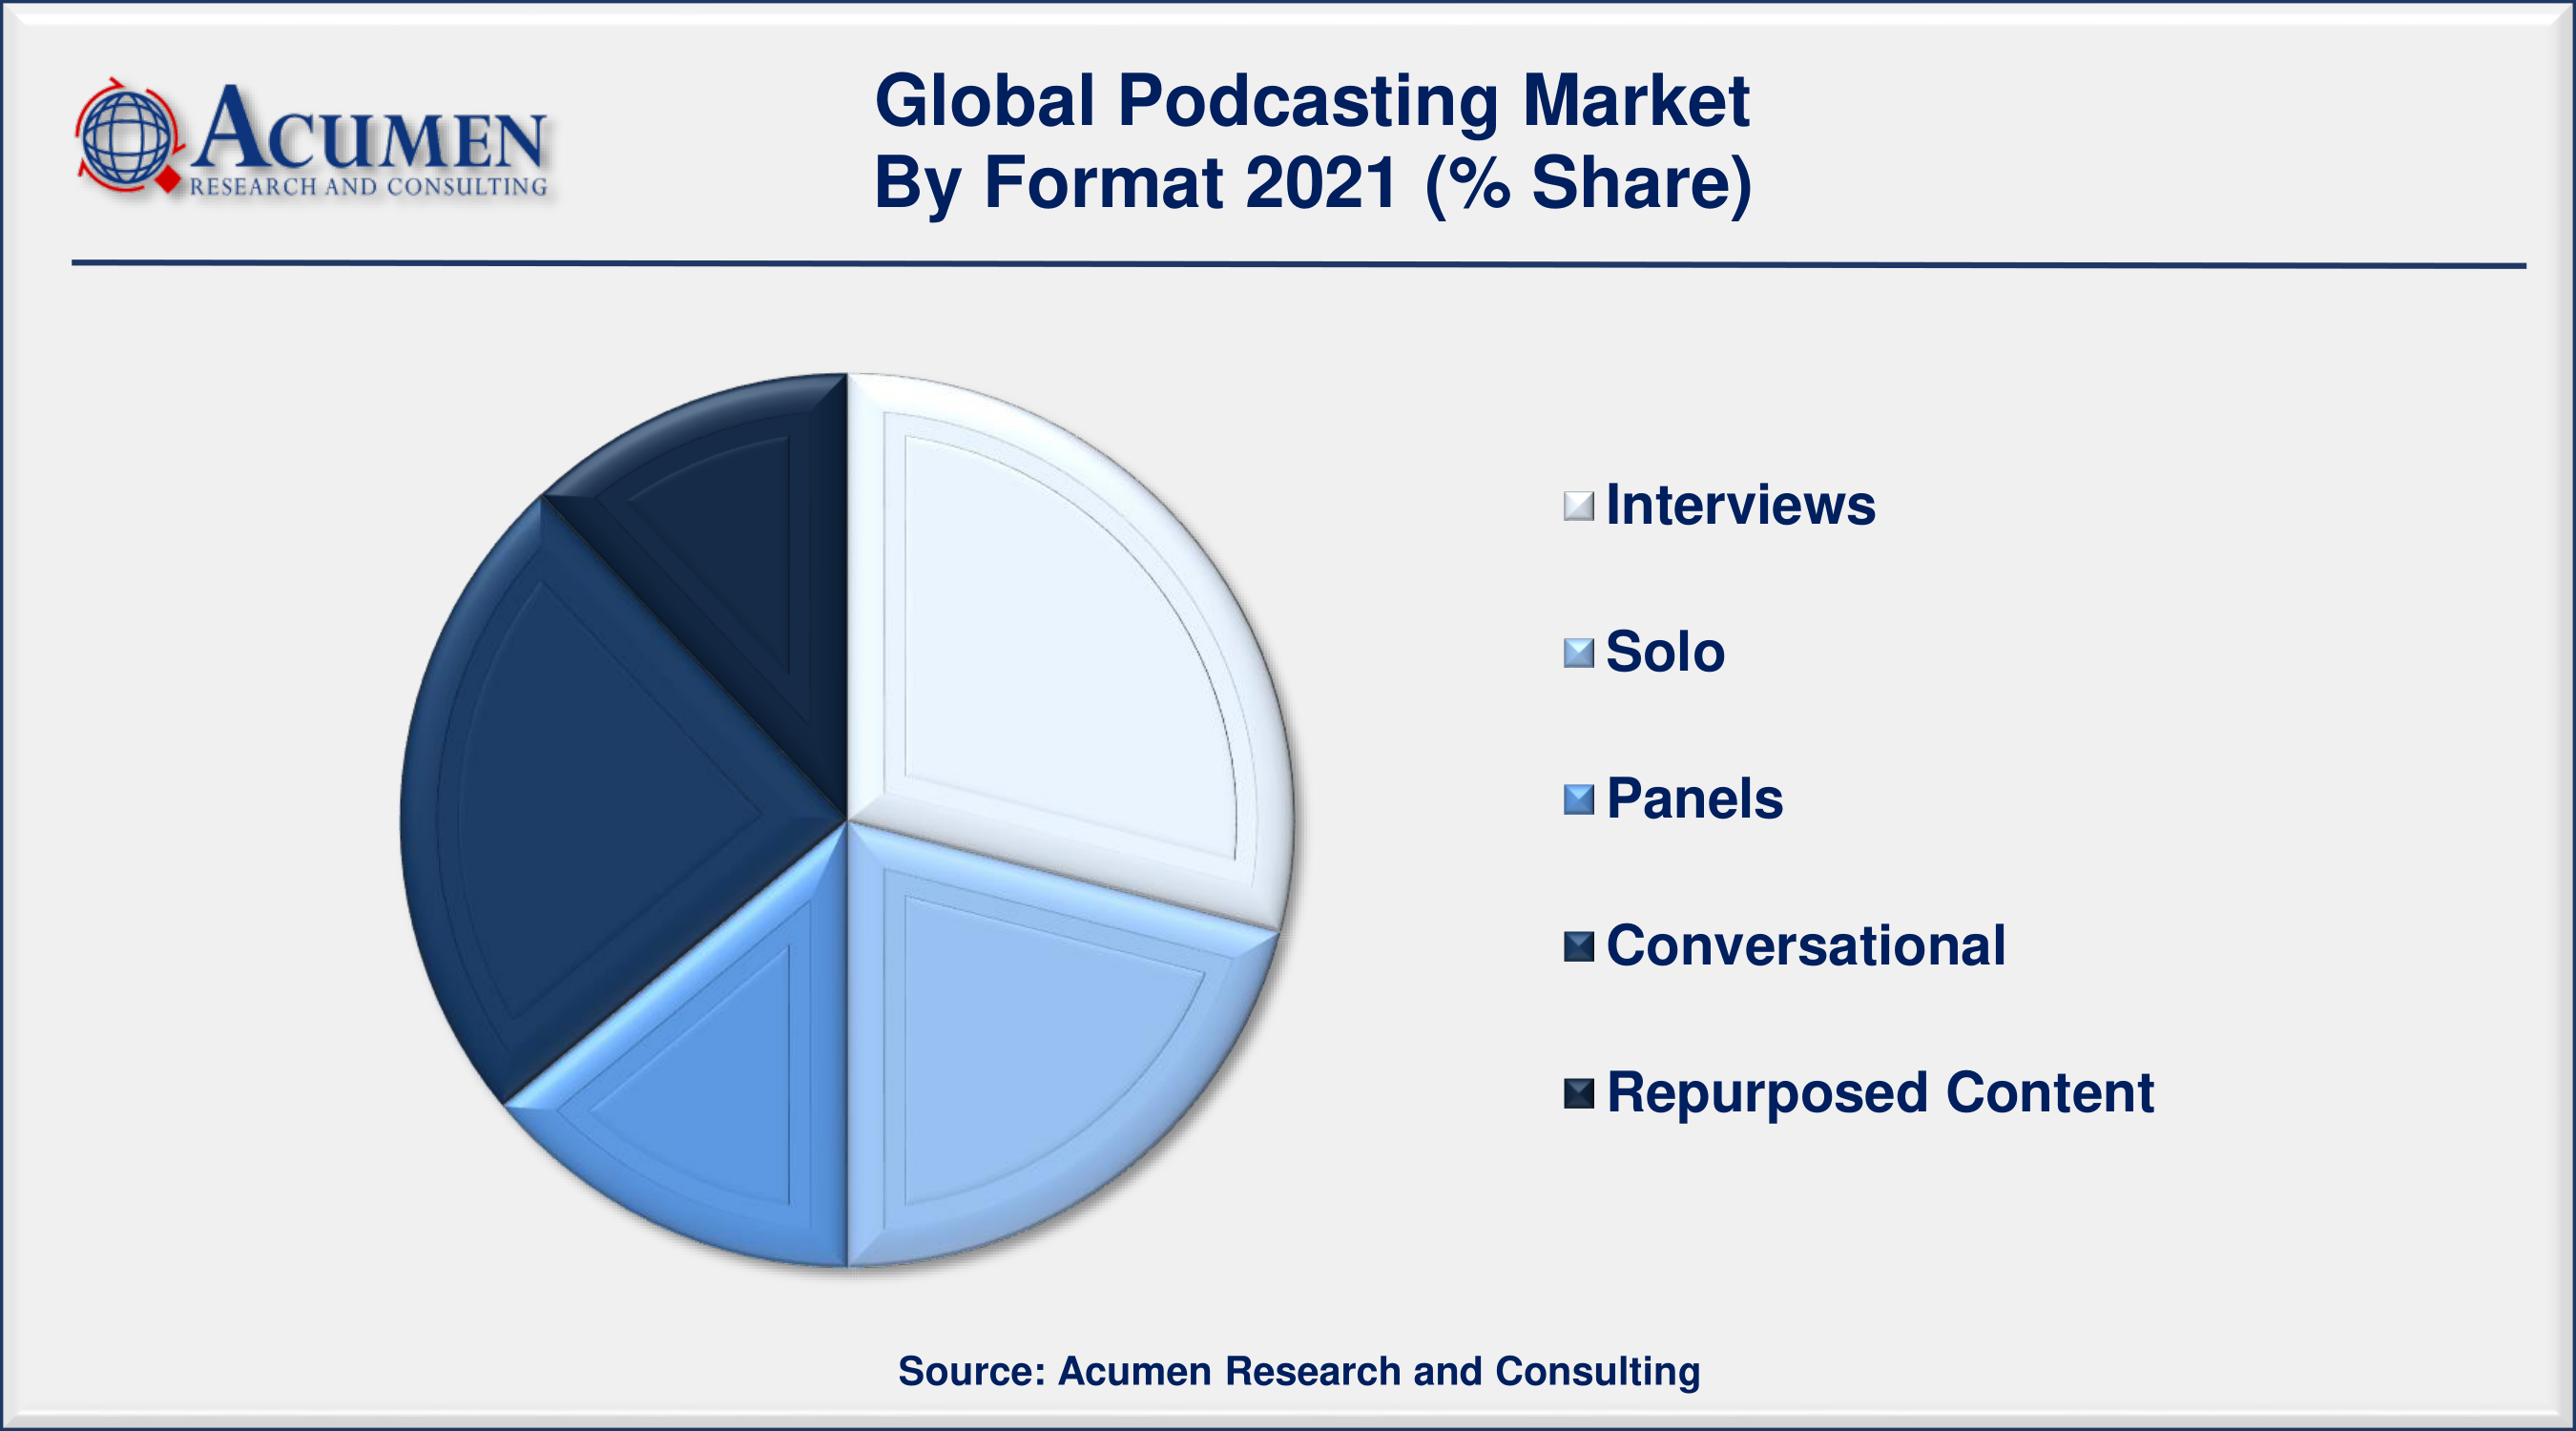 Podcasting Market Analysis was valued at USD 13,785 Million in 2021 and is predicted to be worth USD 153,071 Million by 2030, with a CAGR of 31.2% from 2022 to 2030.